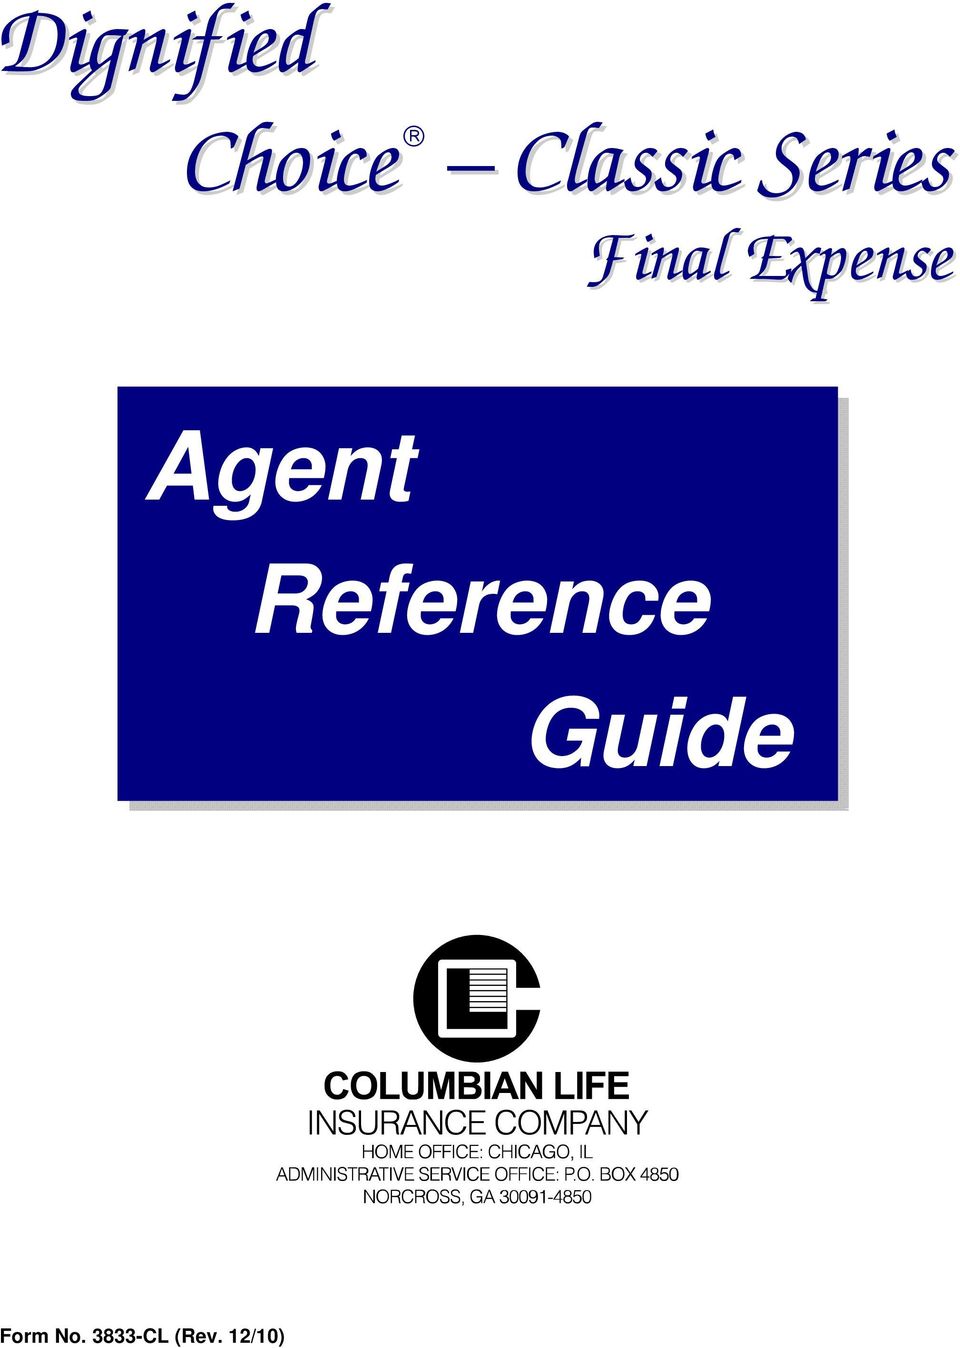 Agent Reference Guide